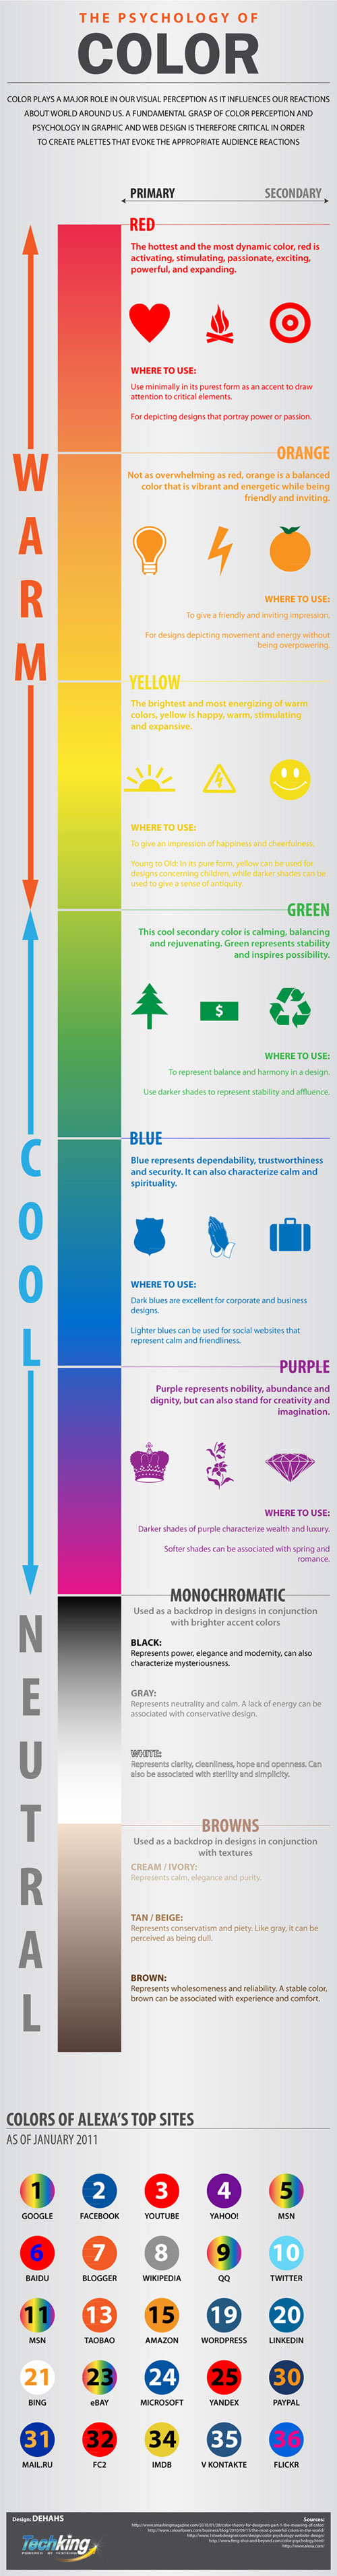 The-Psychology-Of-Color-infographic